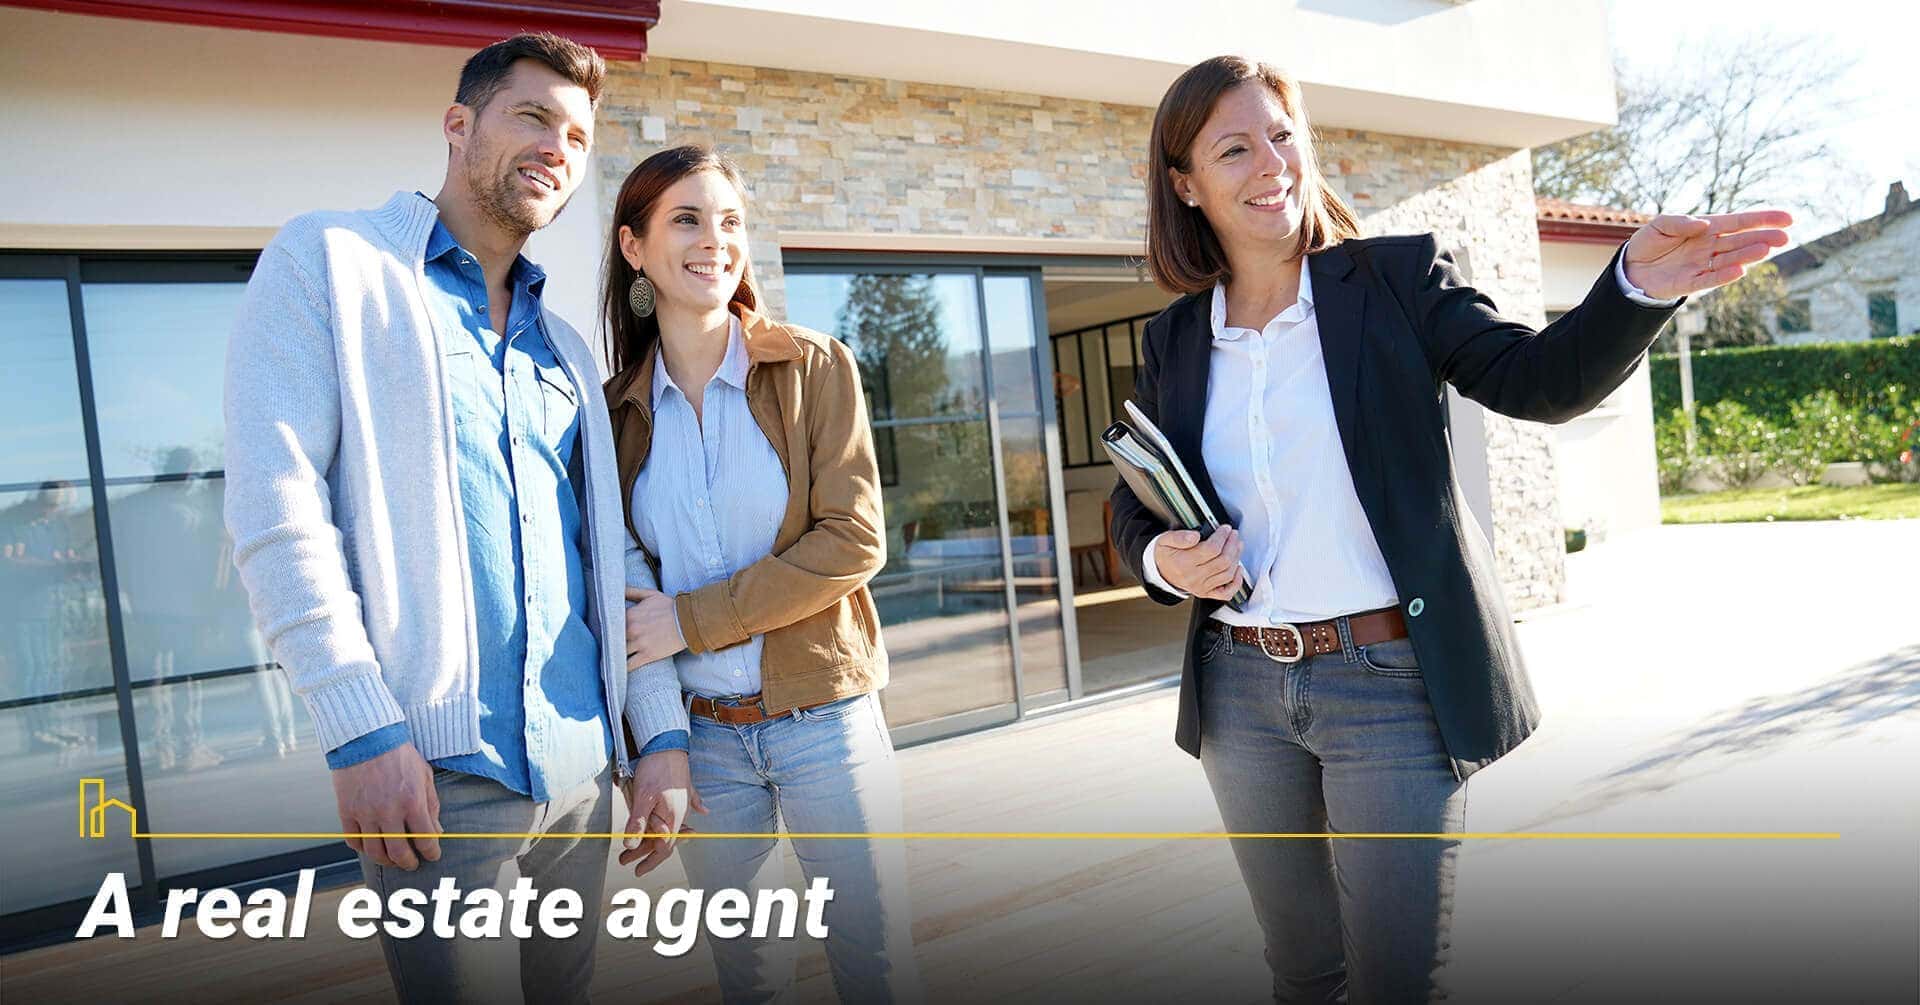 A real estate agent, a saleperson, a real estate consultant, real estate associates or professionals